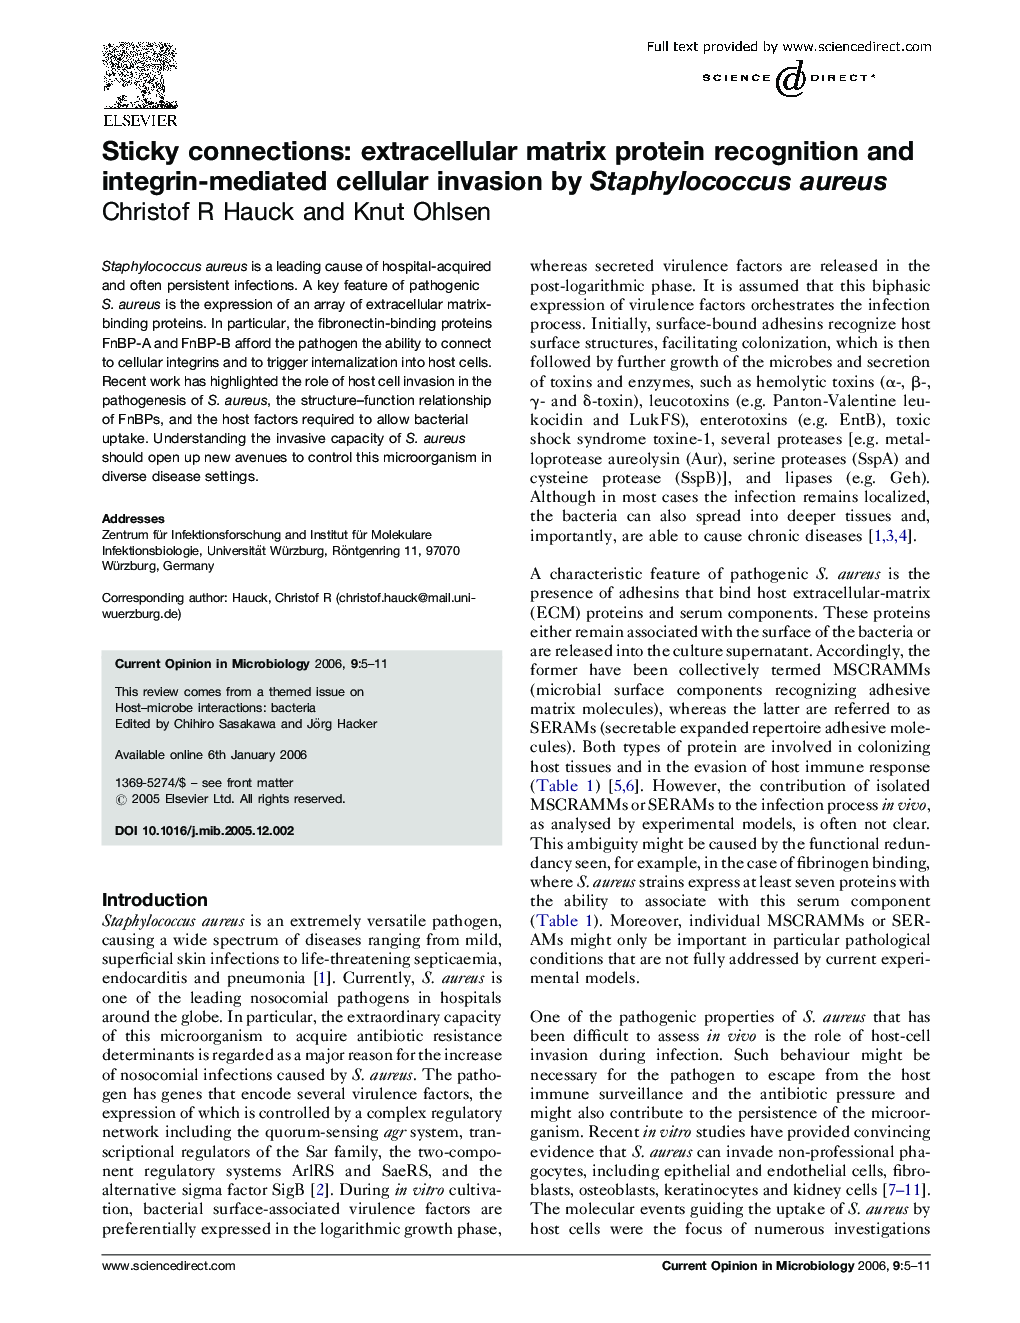 Sticky connections: extracellular matrix protein recognition and integrin-mediated cellular invasion by Staphylococcus aureus